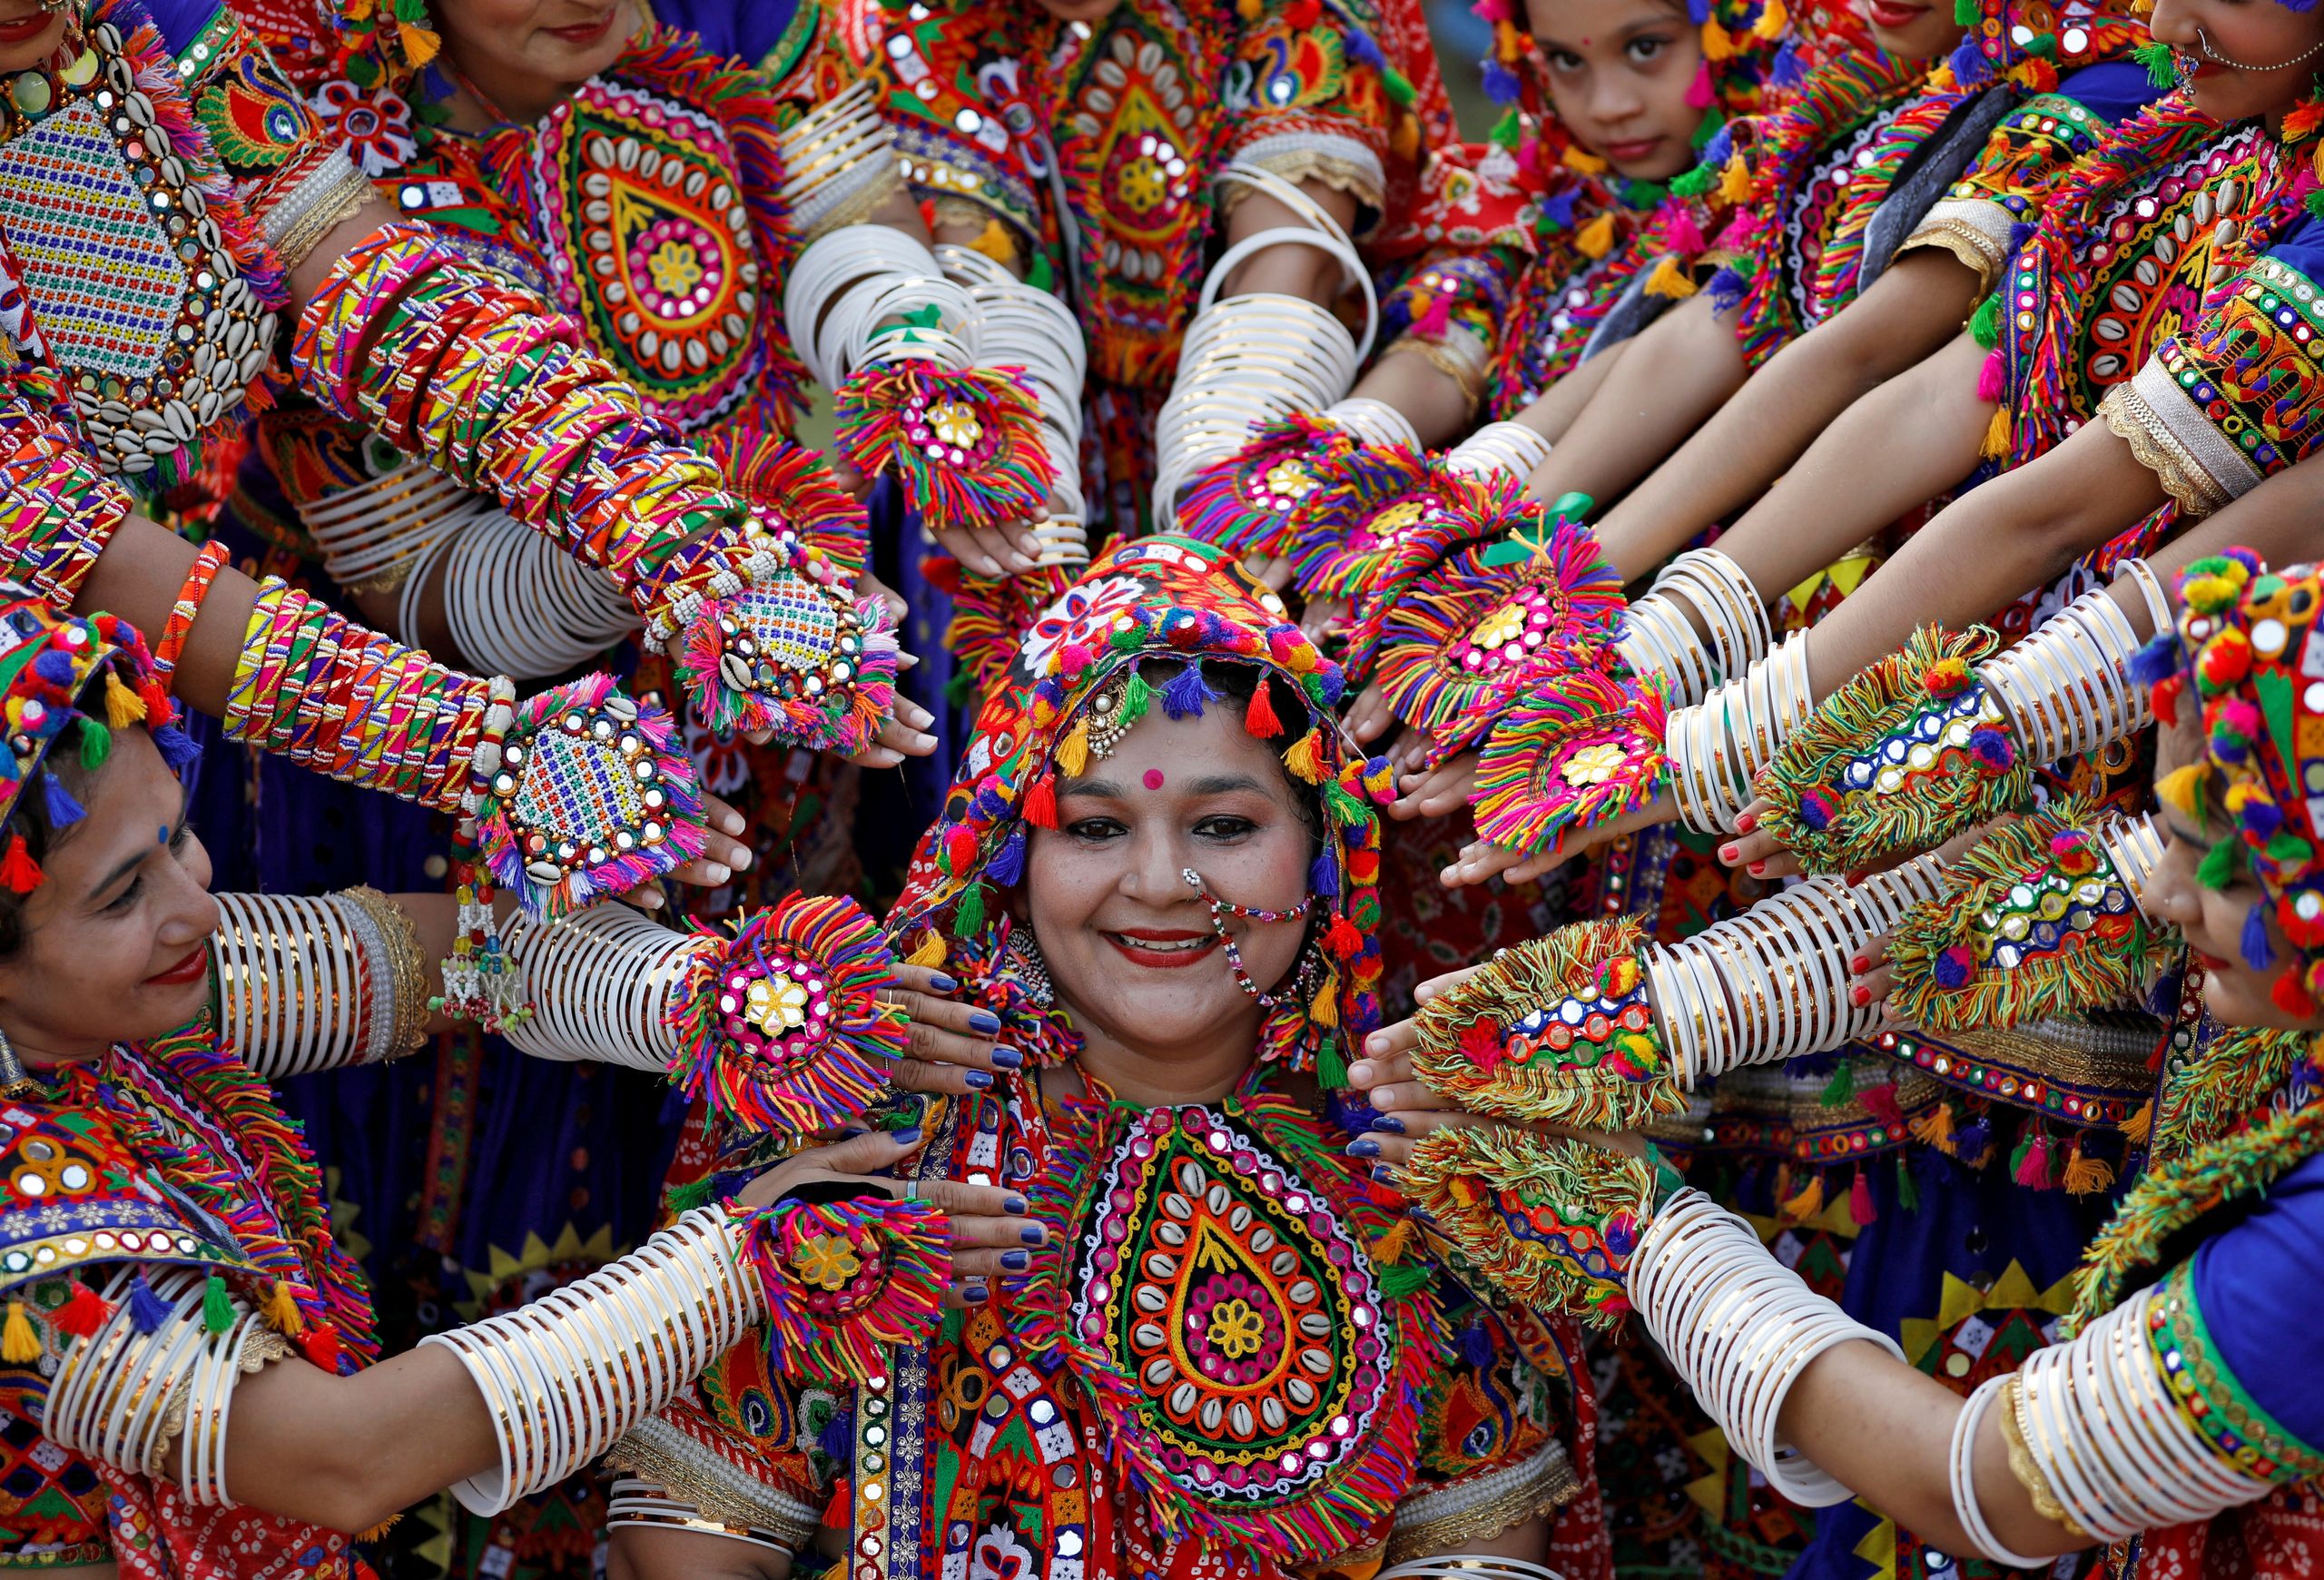 Participants dressed in traditional attire pose at rehearsals for Garba, a folk dance, in preparations for the Navratri, a fe